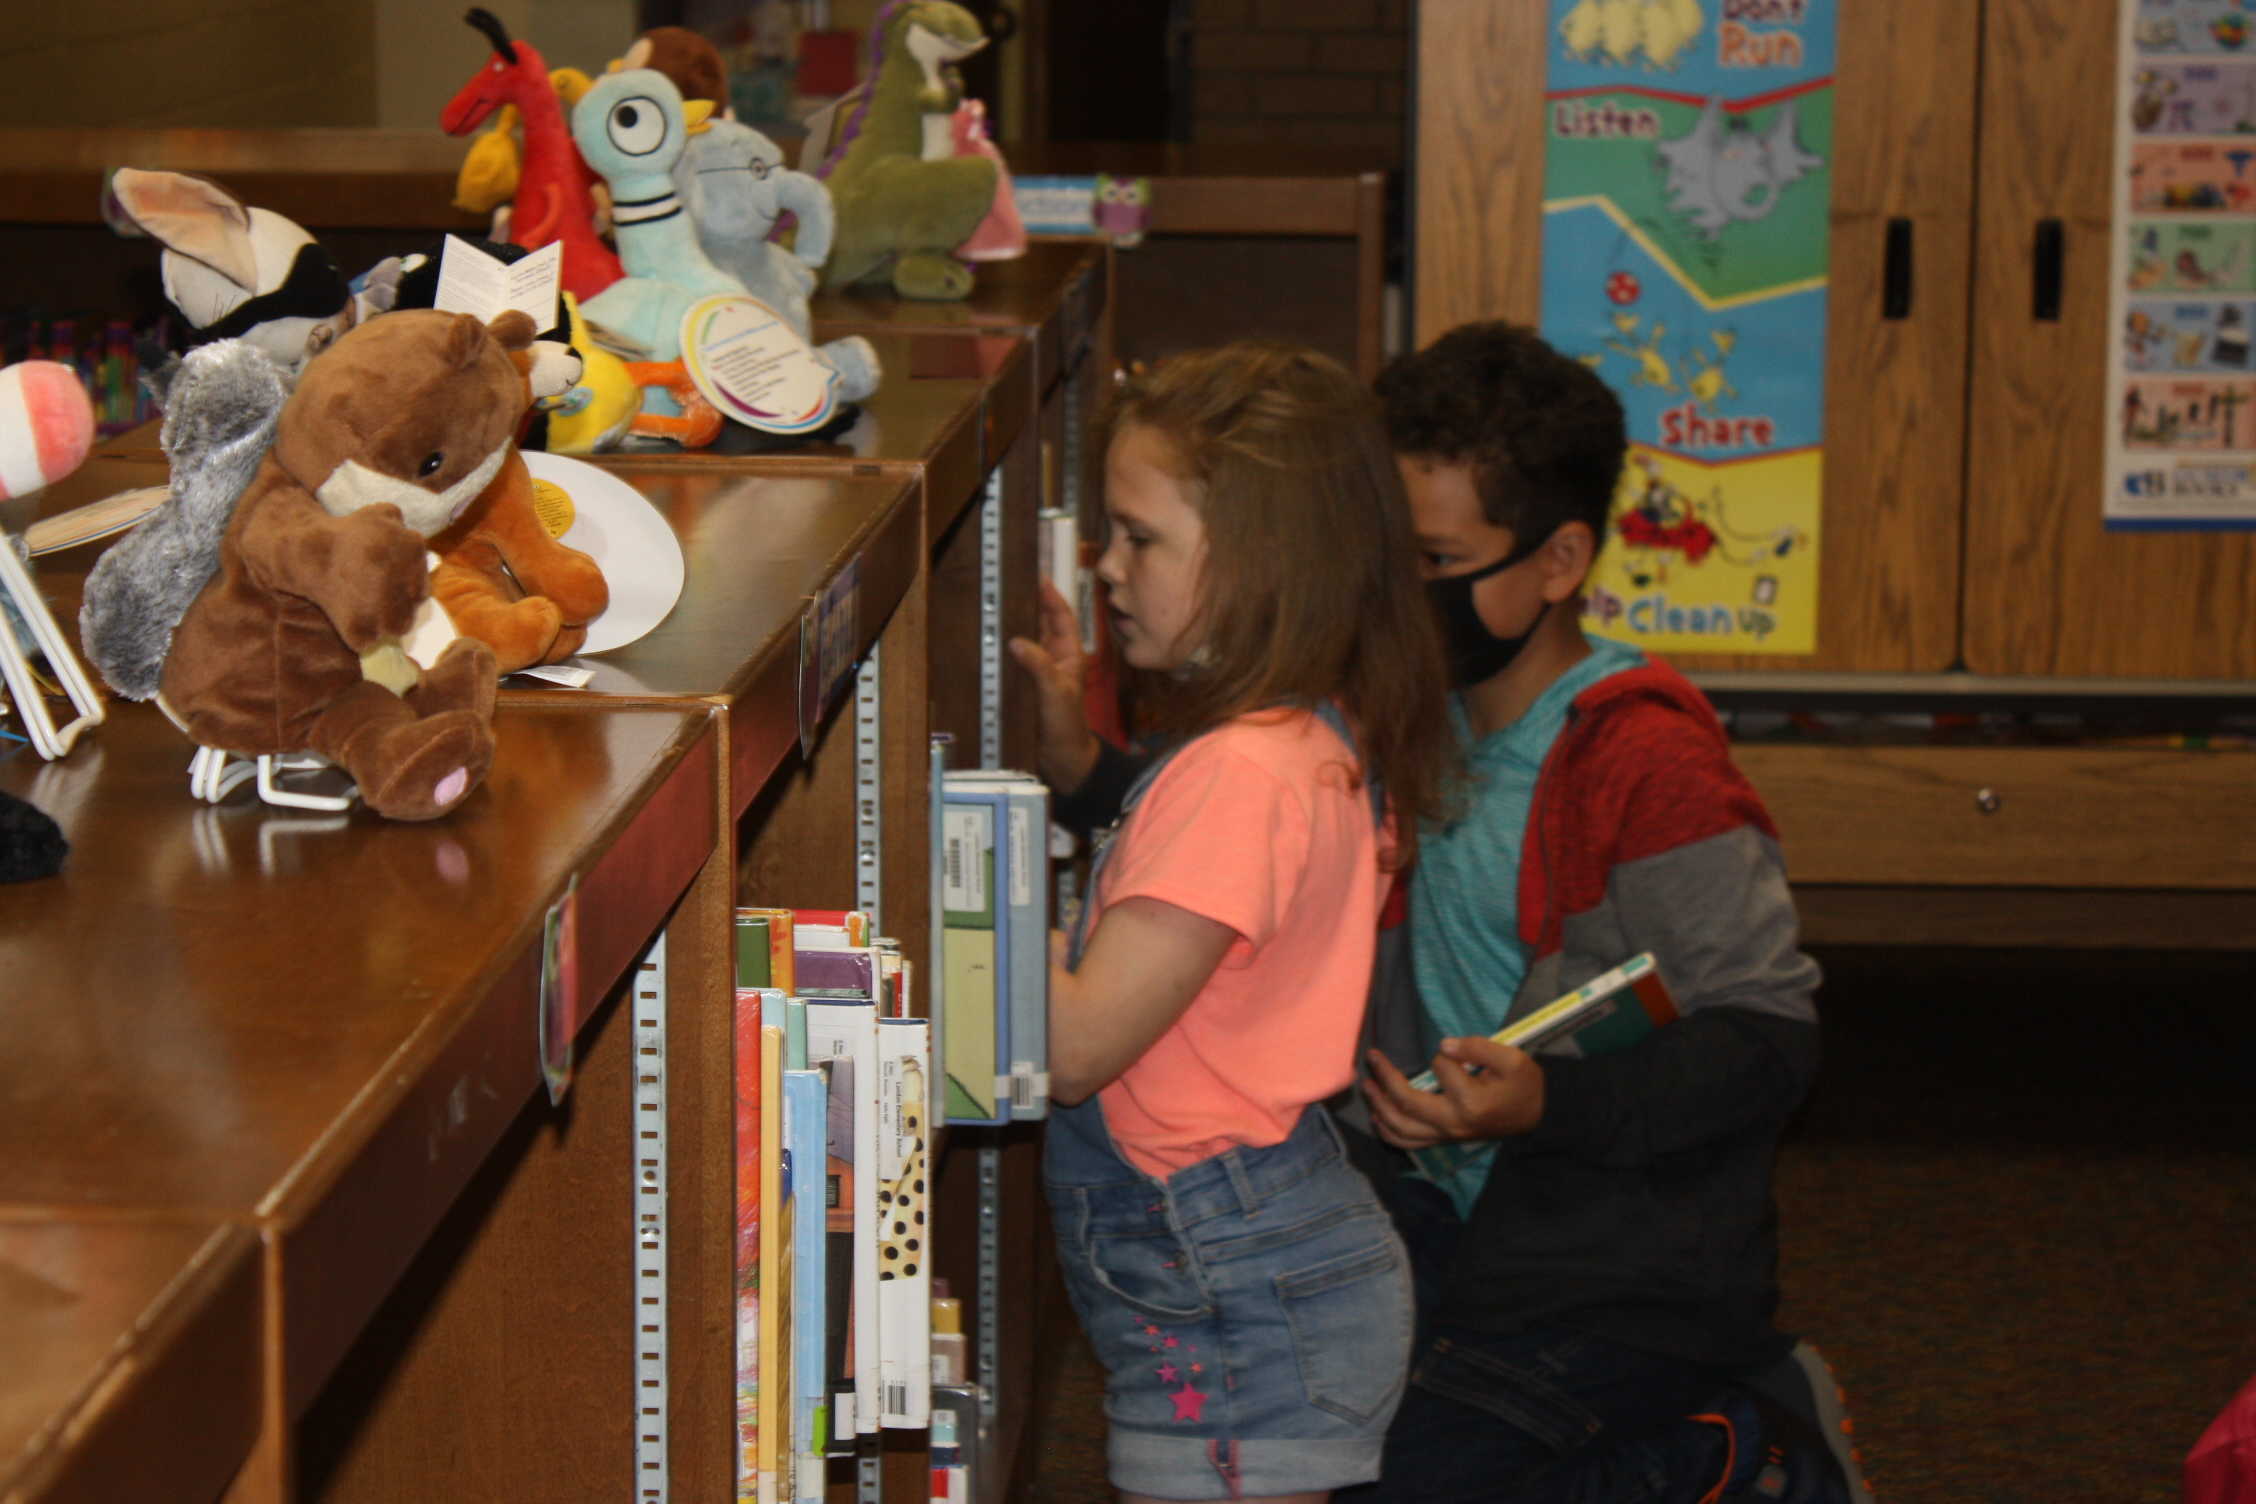 Students looking for books in the library.